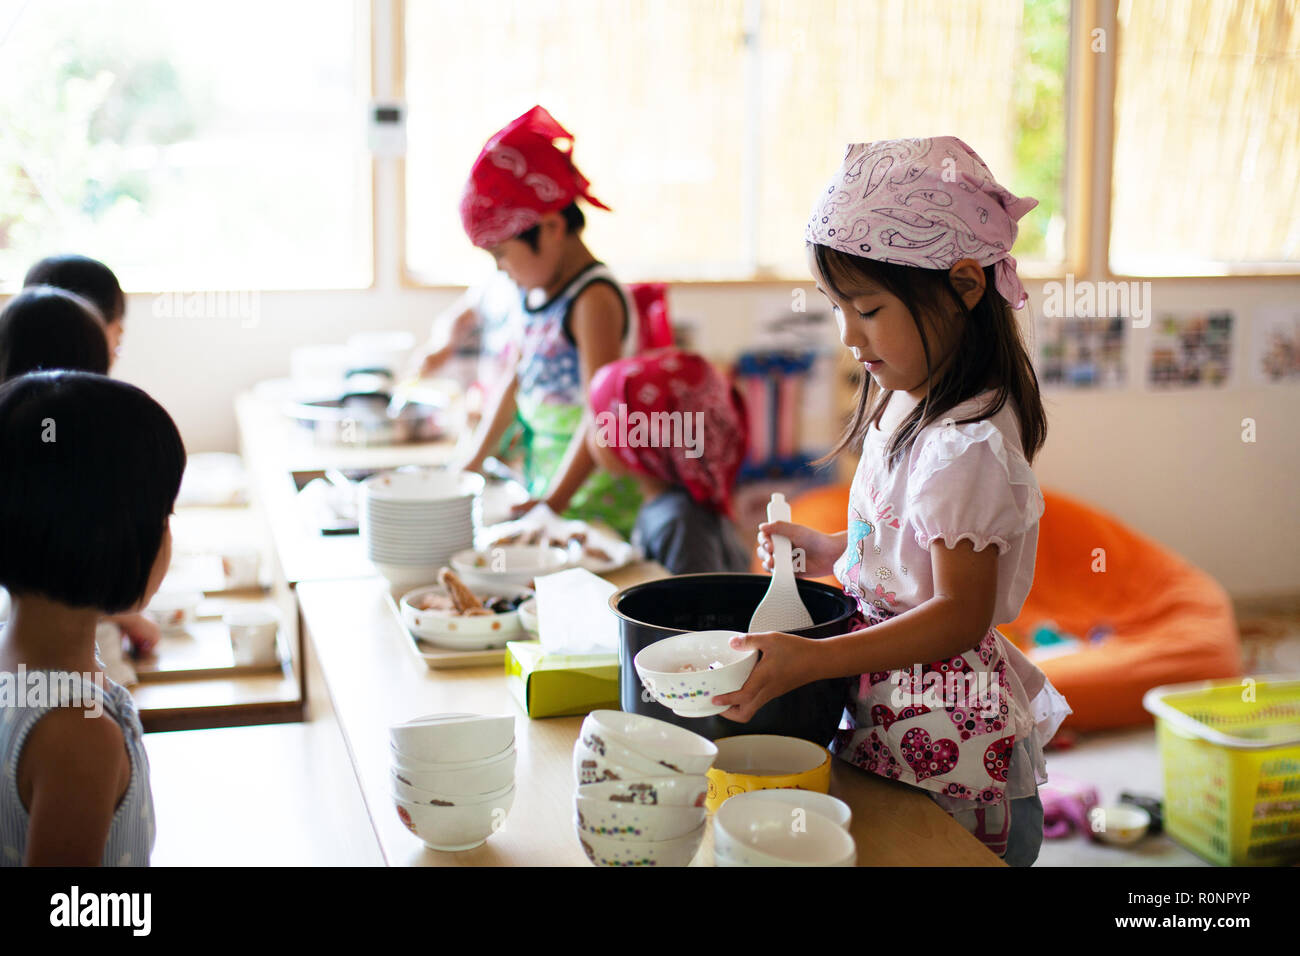 A girl and a boy wearing headscarves standing at a table in a Japanese preschool, serving lunch. Stock Photo